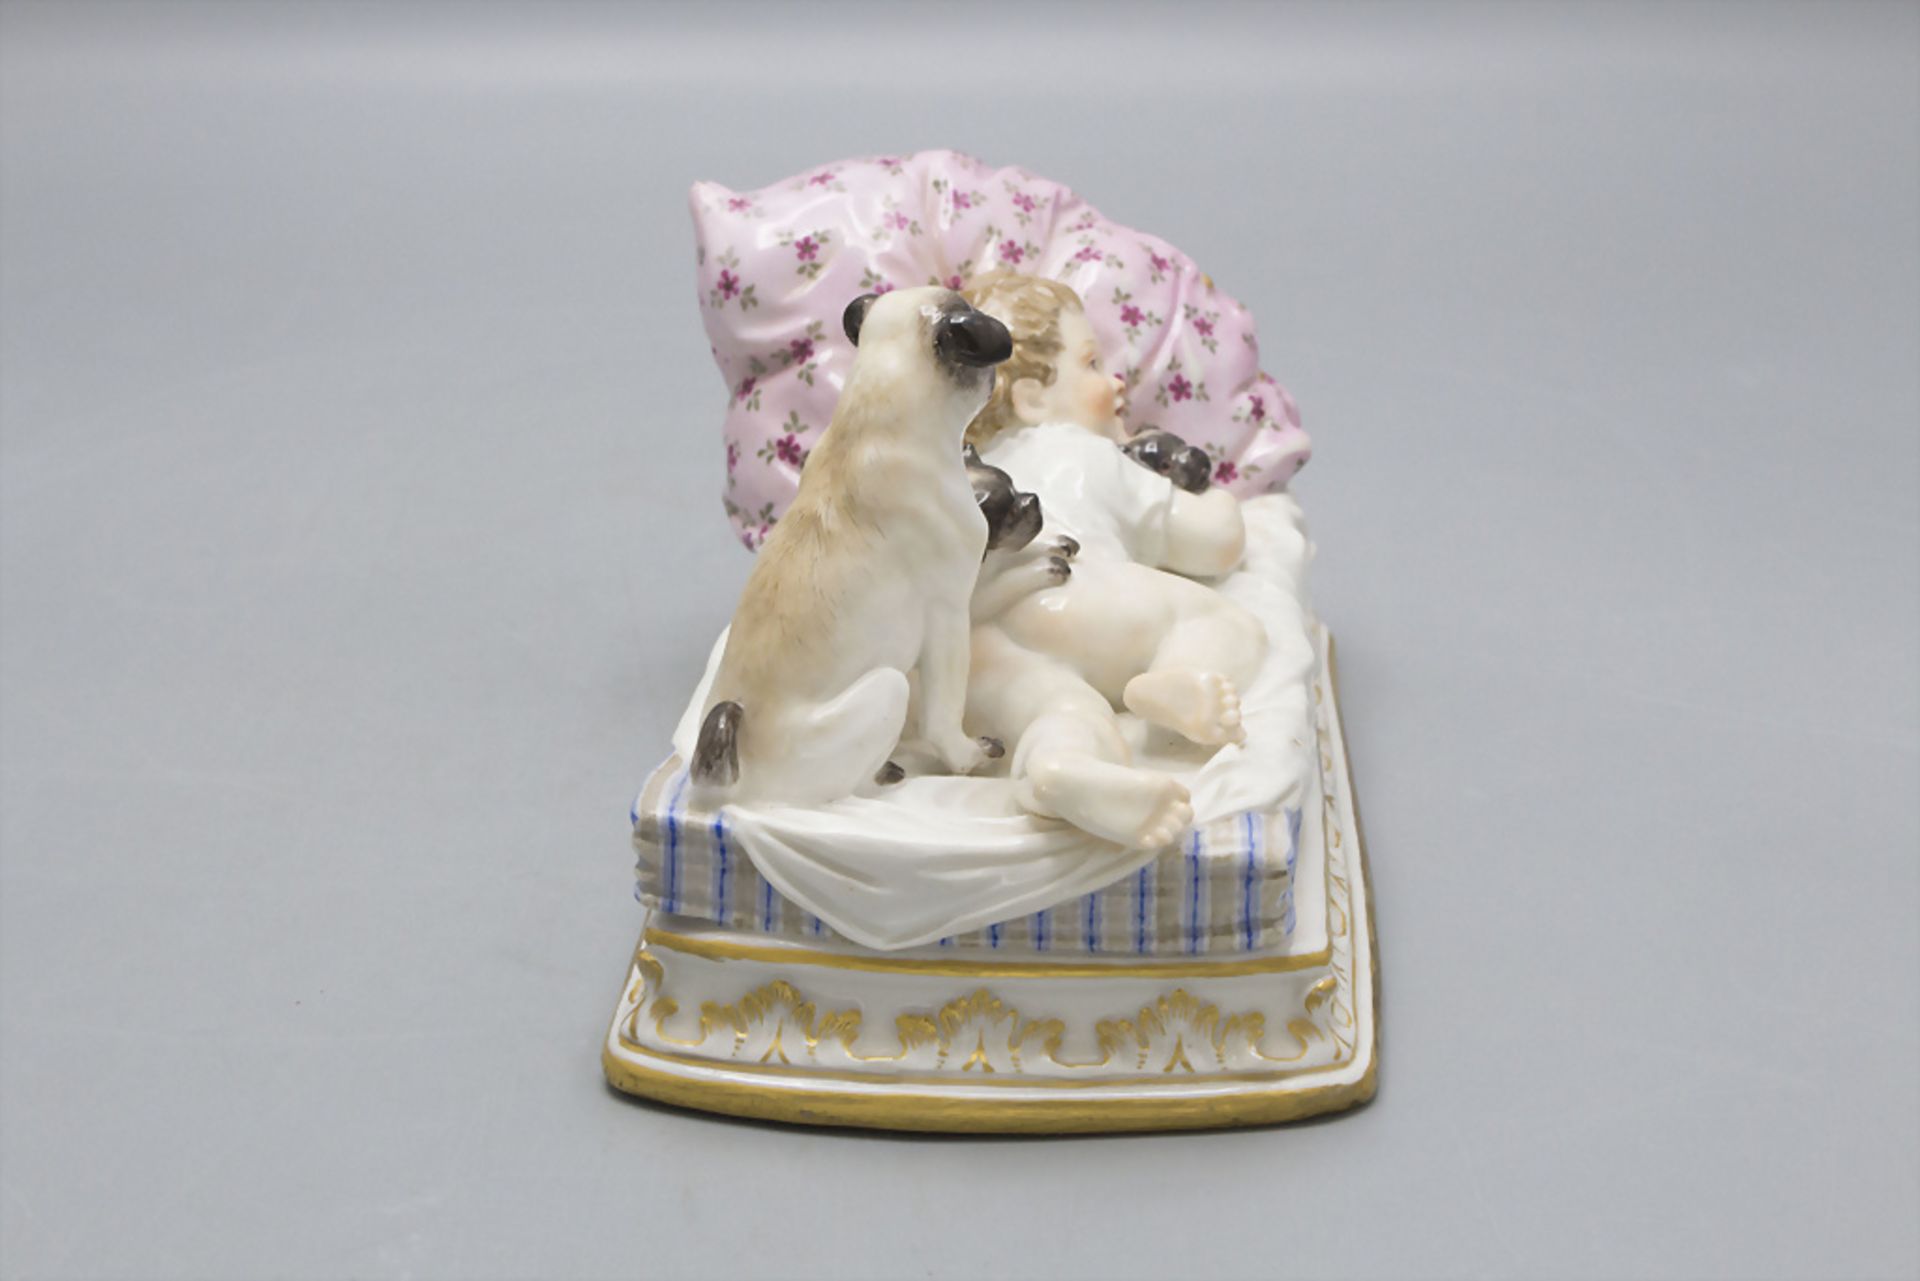 Kind mit 3 Mopshunden / A child with 3 pug dogs, Meissen, Ende 19. Jh. - Image 4 of 5